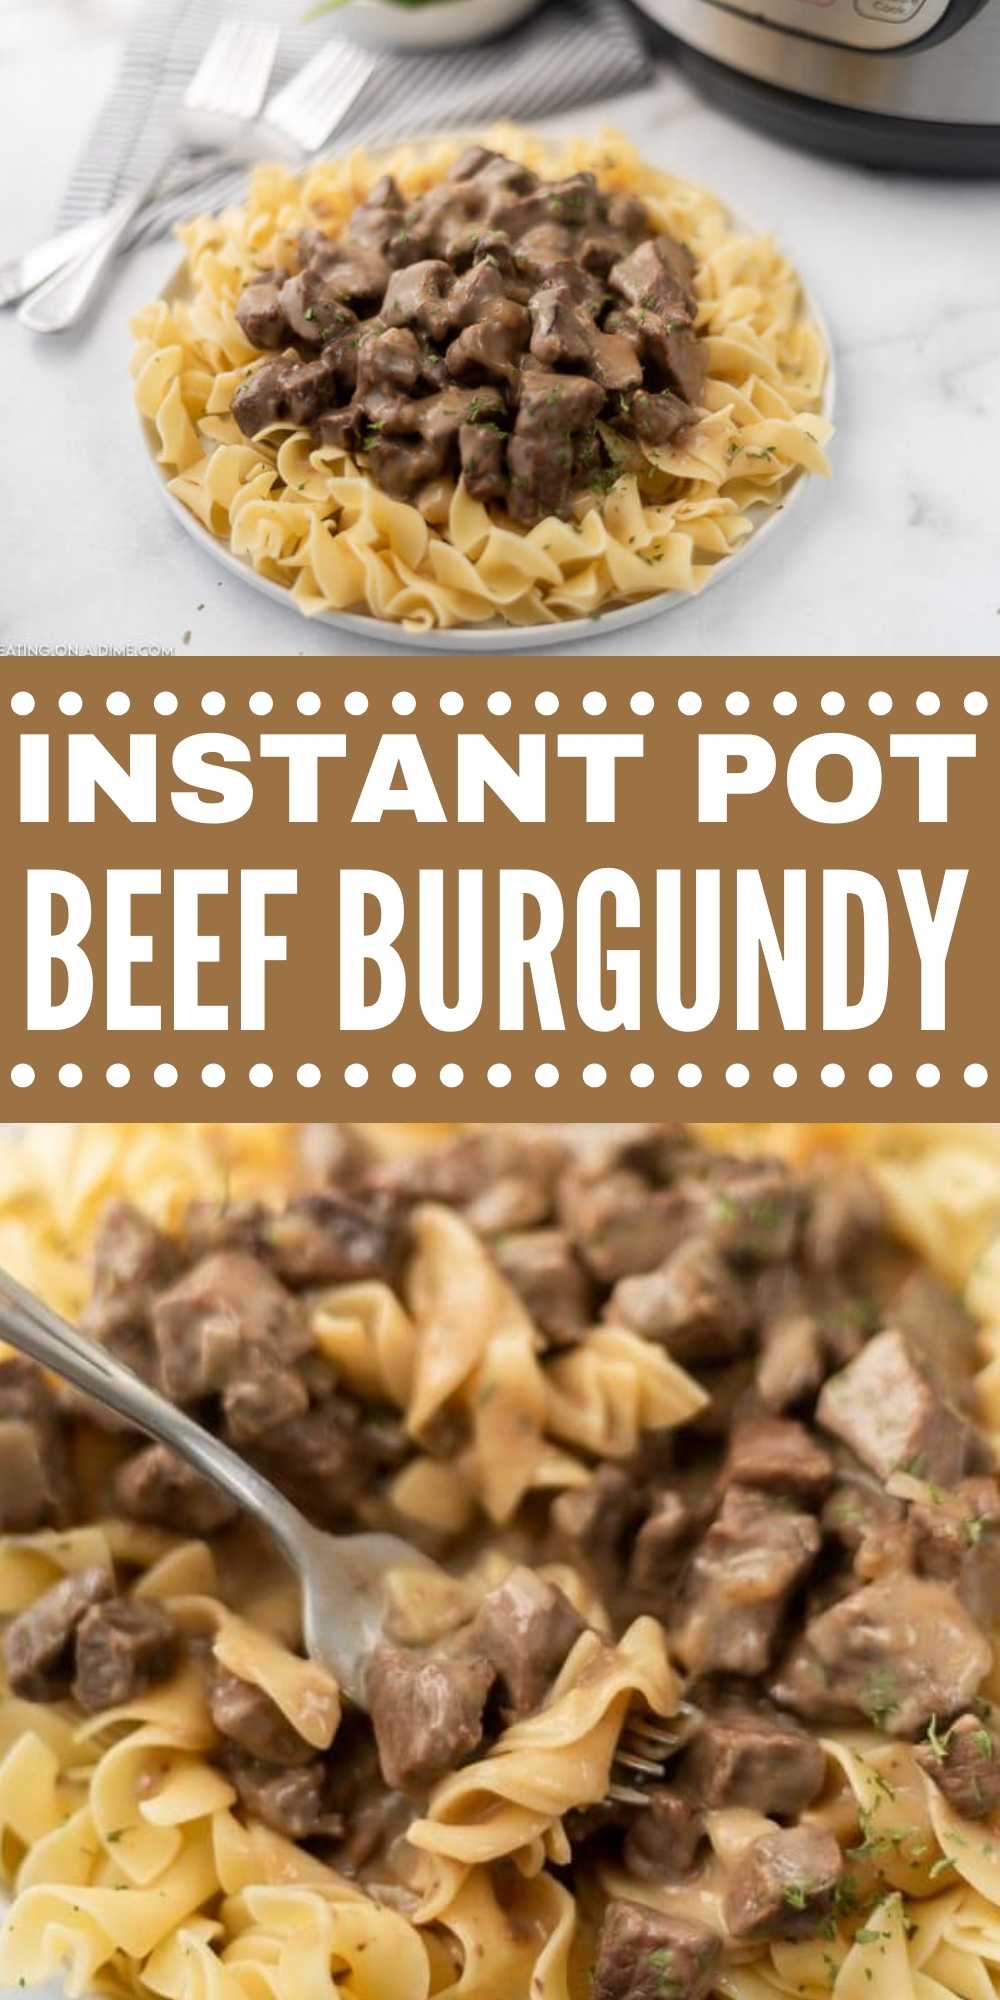 Instant Pot Beef Burgundy Recipe is so simple to make. You only need 4 ingredients and 20 minutes to get Beef Burgundy recipe on the table. The entire family will love this Instant Pot Beef Burgundy Stew Recipe.  #eatingonadime #instantpotrecipes #pressurecookerrecipes #beefrecipes #beefburgundy 
